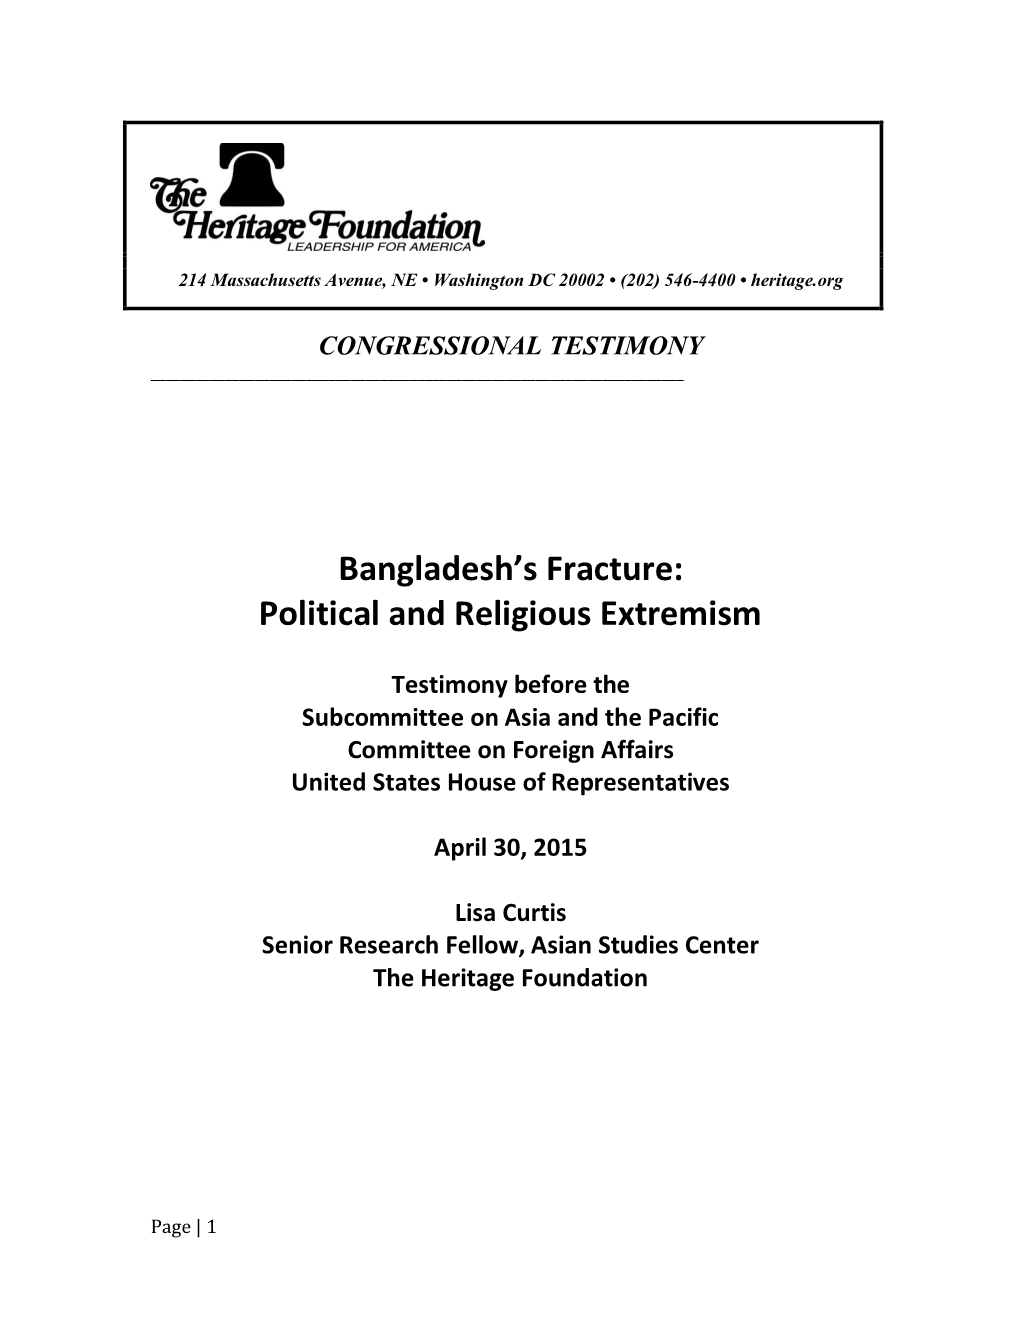 Bangladesh's Fracture: Political and Religious Extremism